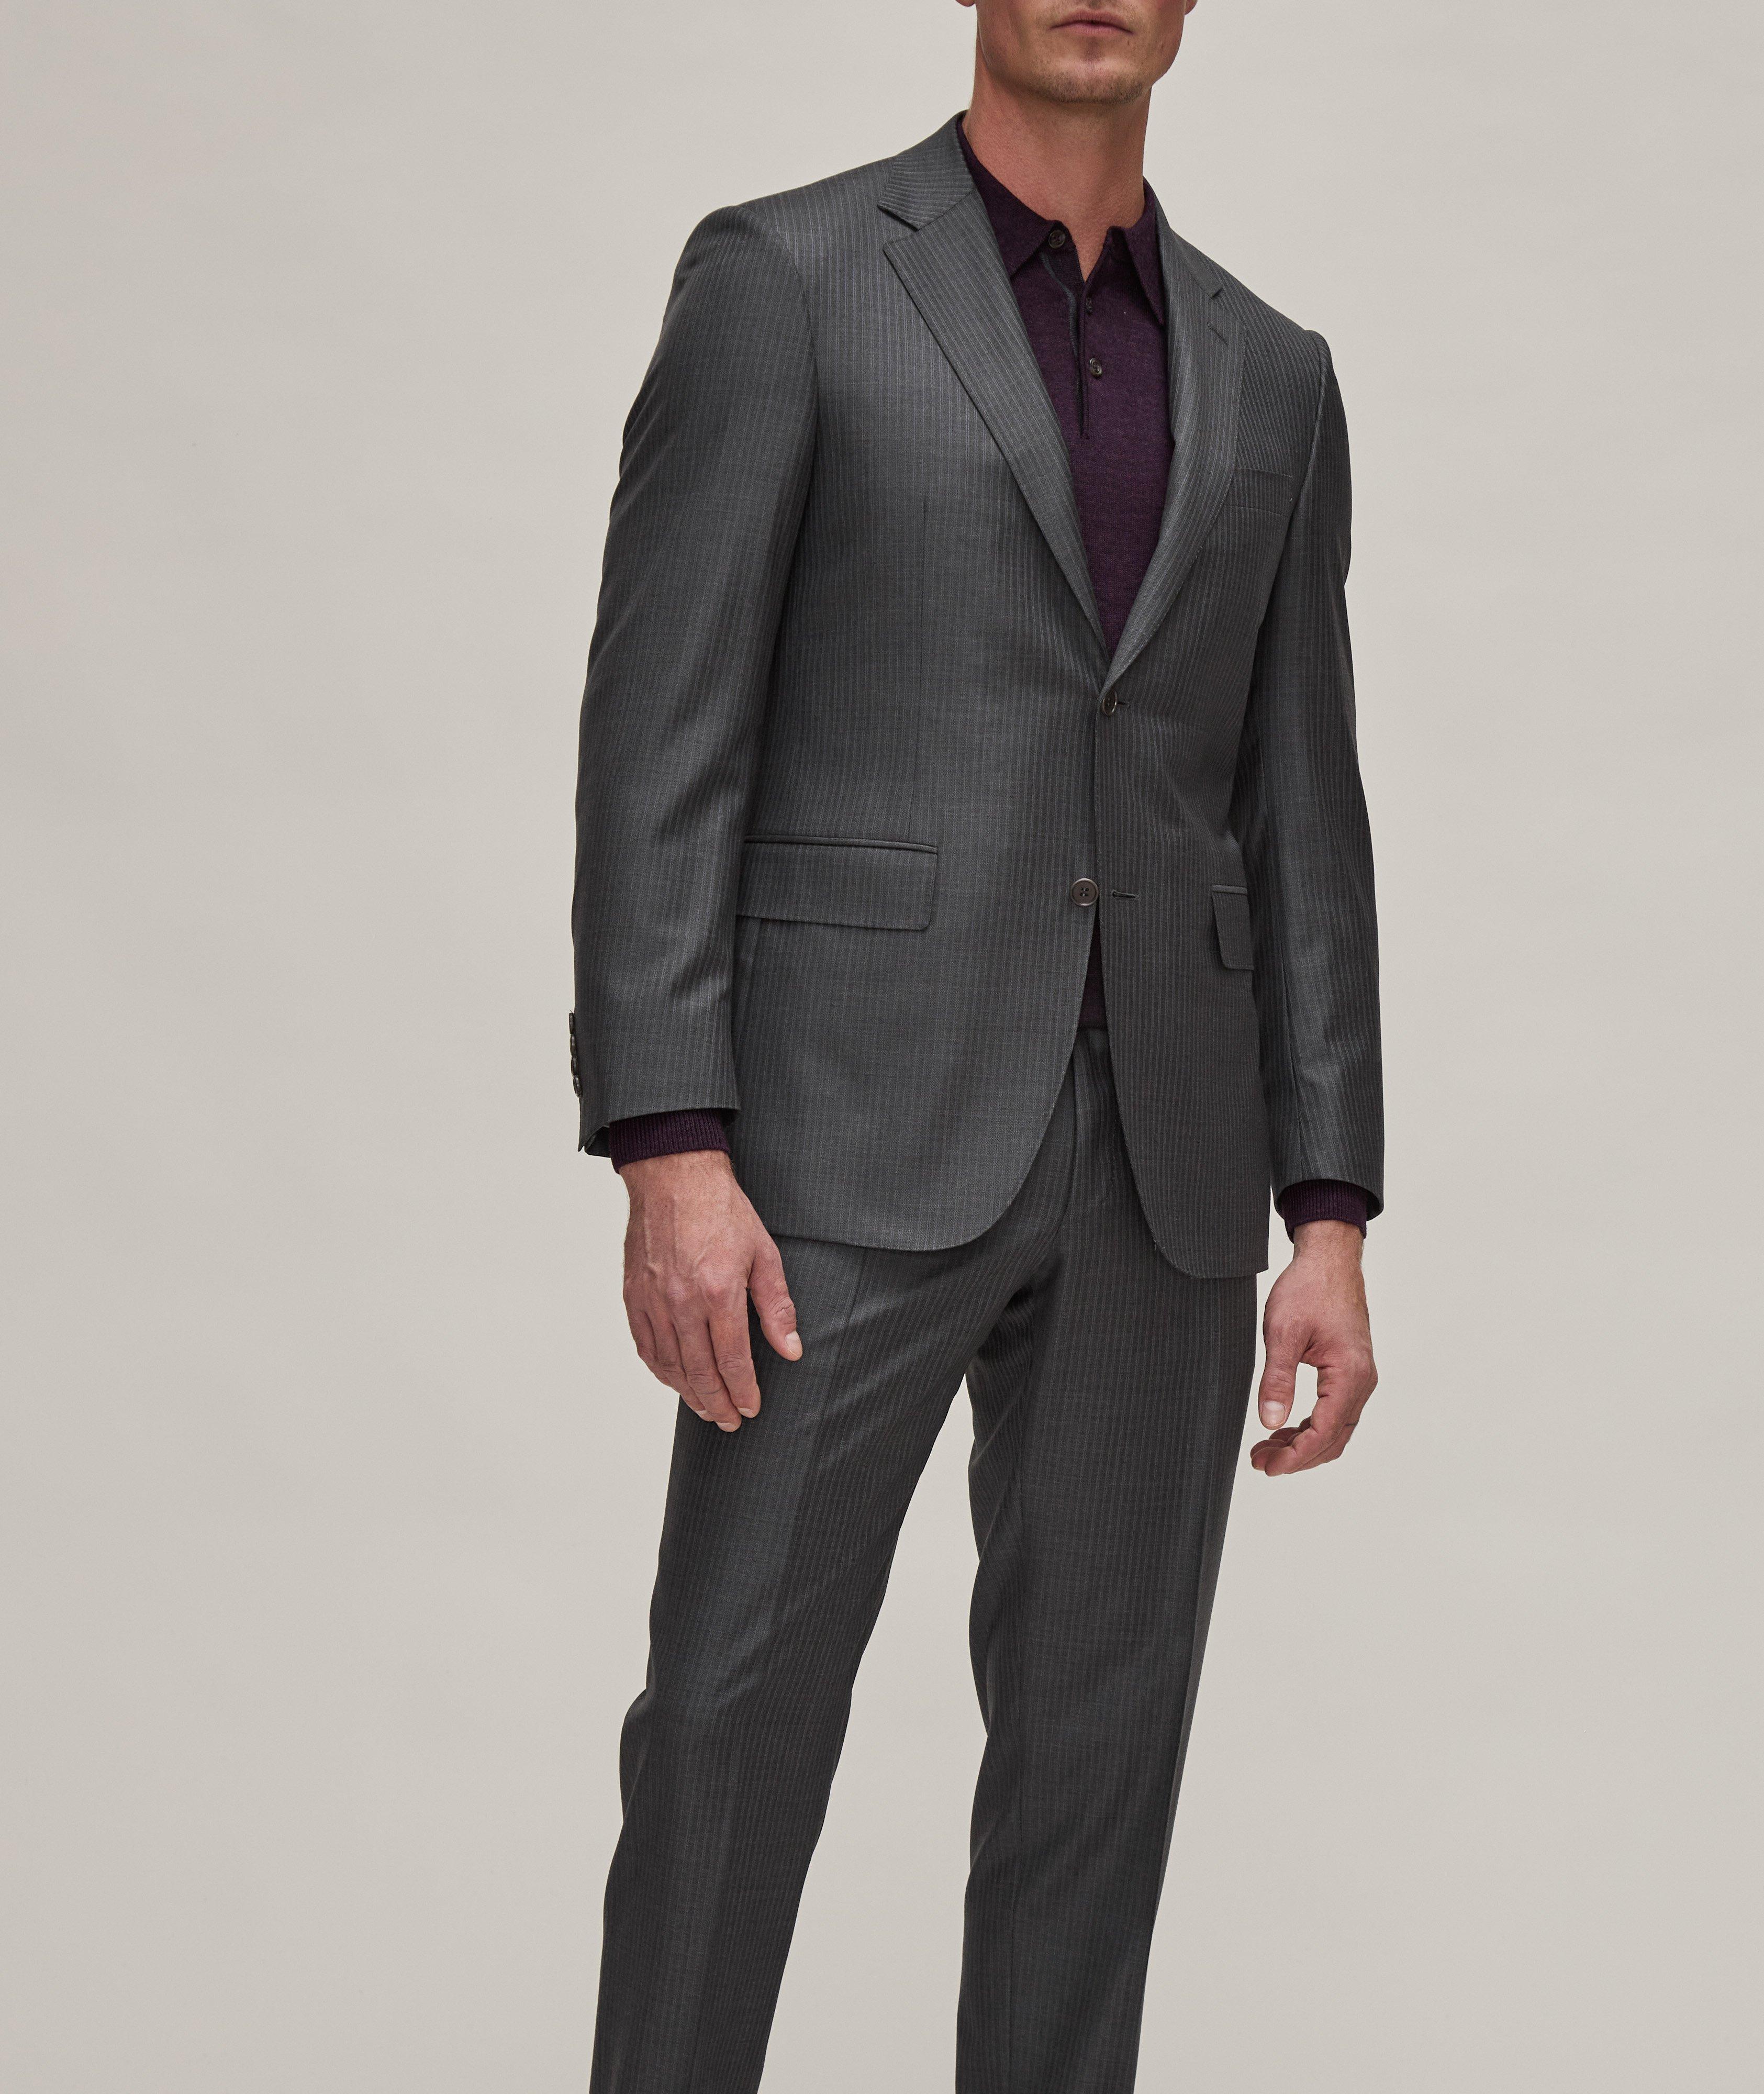 Contemporary Line Pinstripe Wool Suit image 1